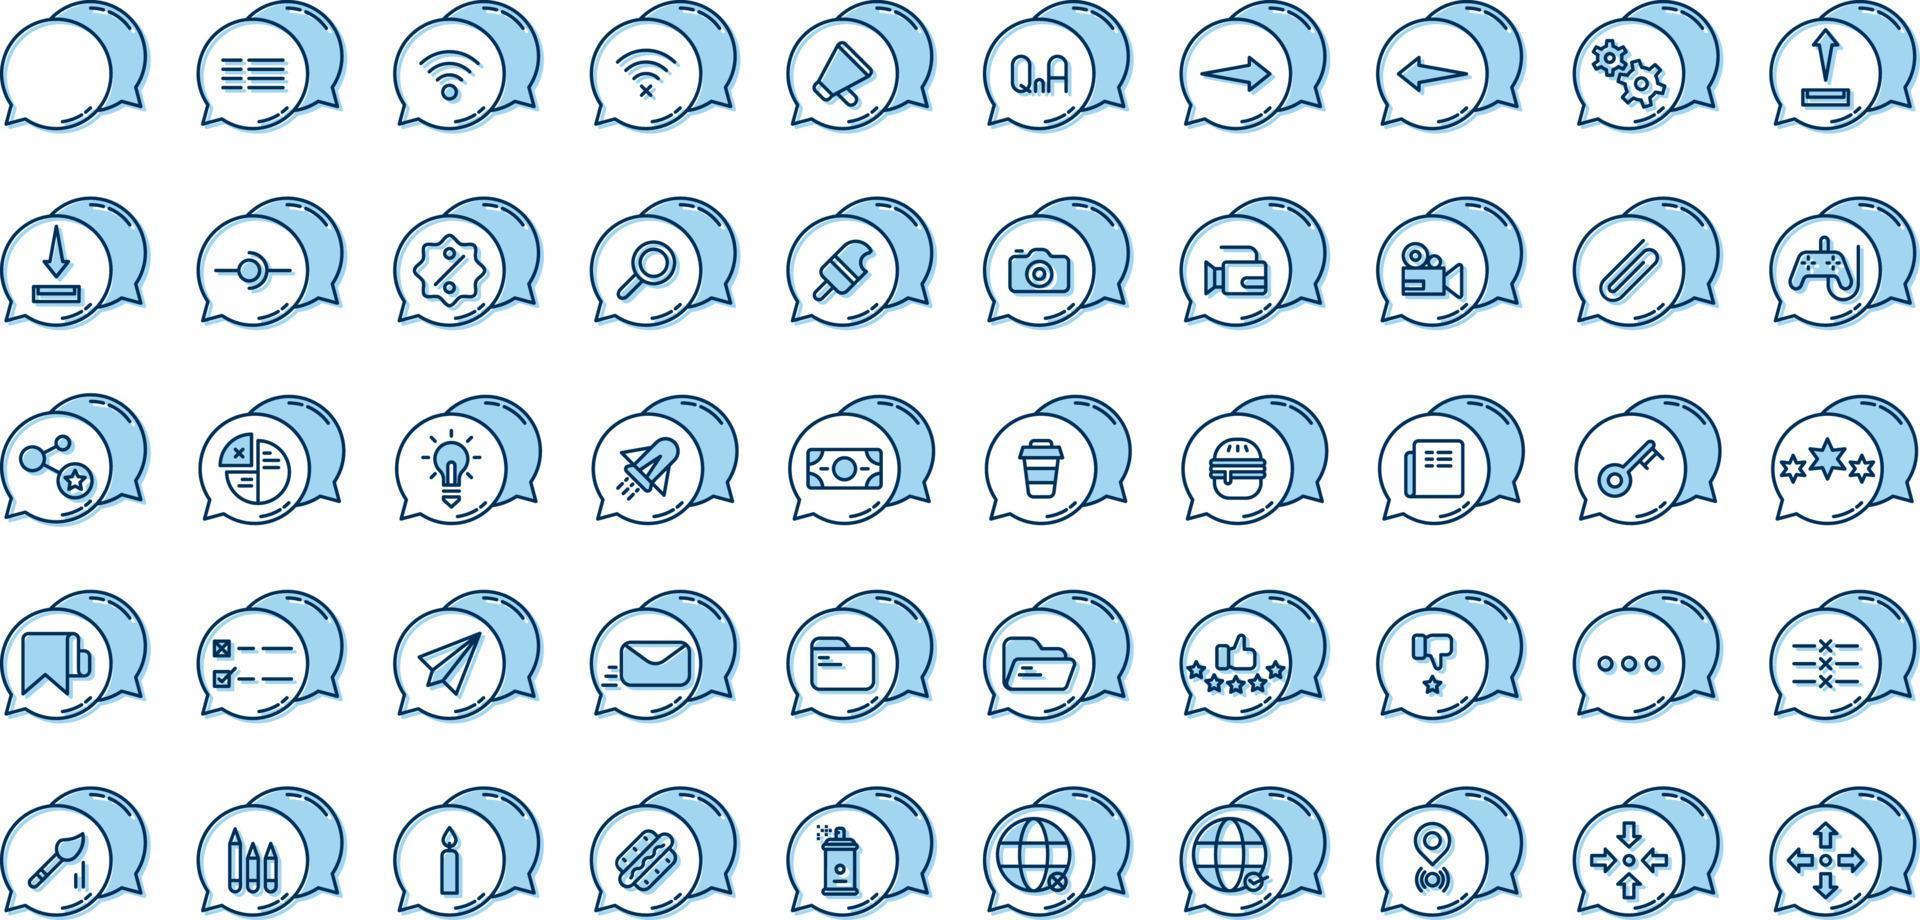 set of speech balloons and tools icons on transparent background vector